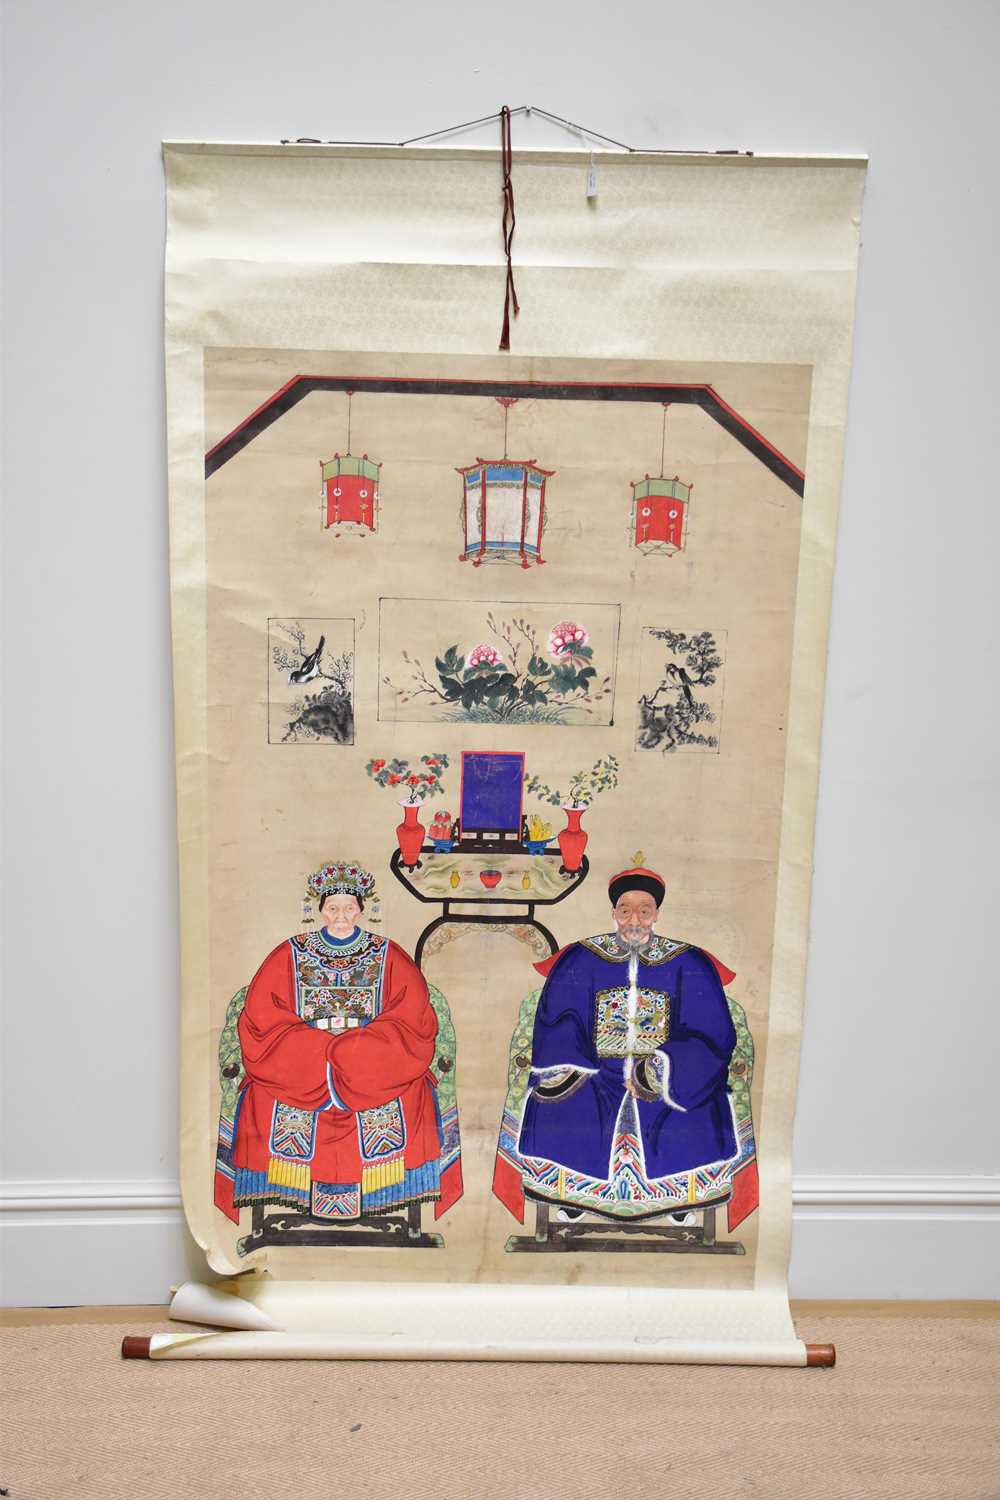 A 19th century Chinese hand painted ancestral portrait depicting elders sitting beside objects,